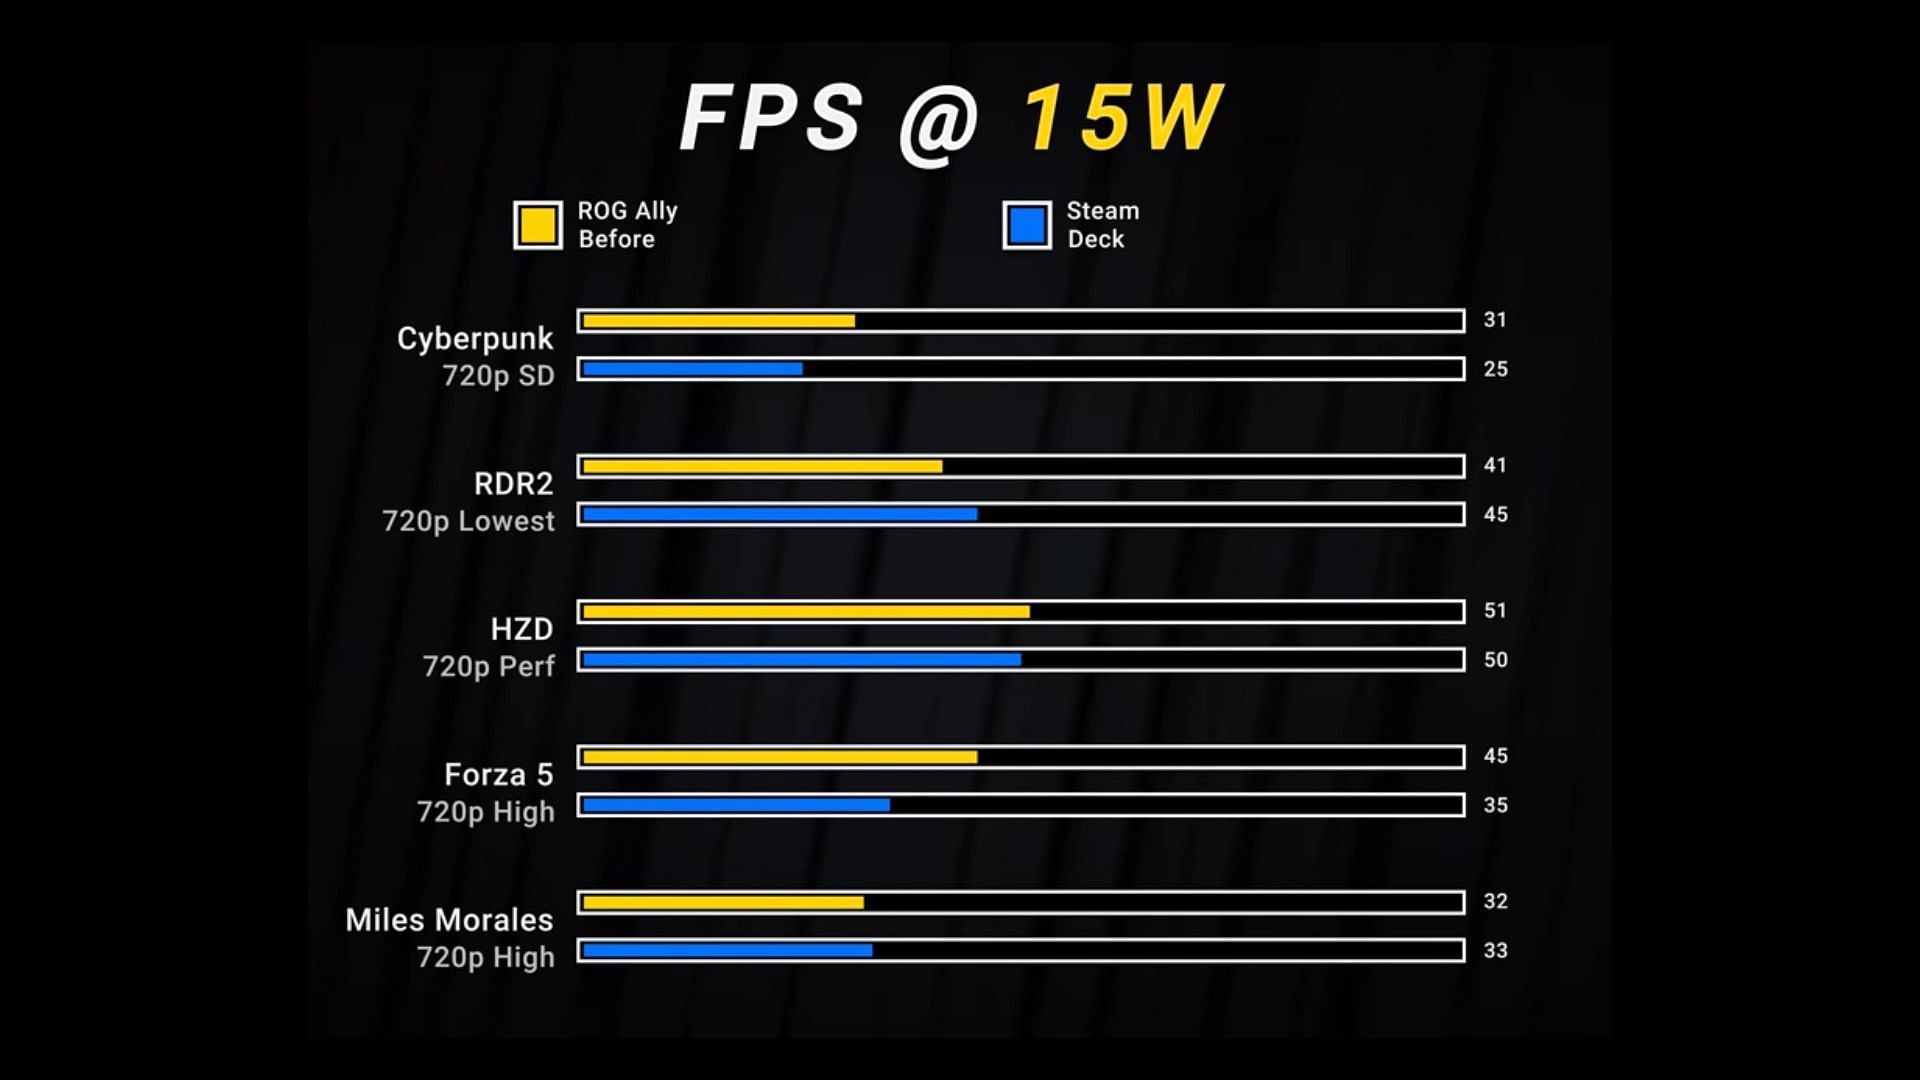 Old performance benchmarks of the ROG Ally at 15W (Image via Dave 2D/YouTube)